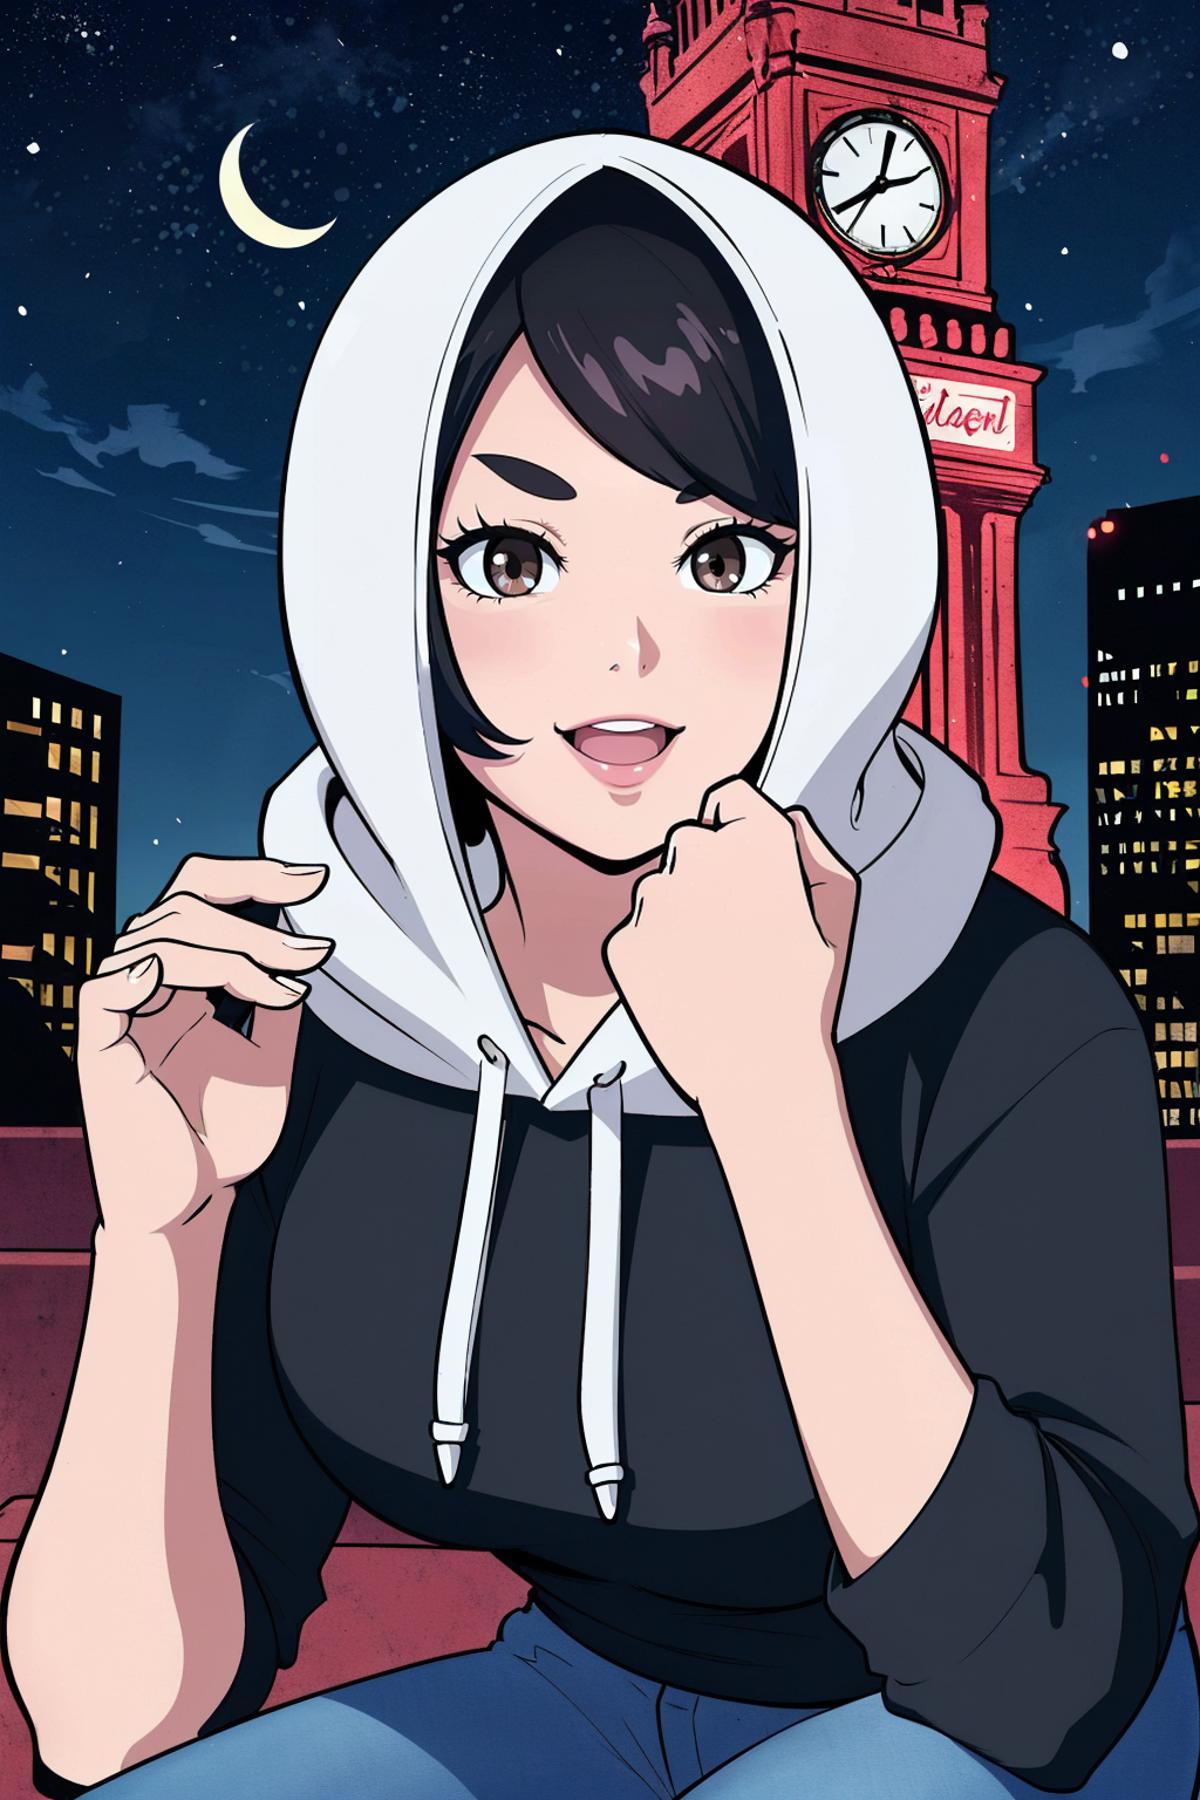 A cartoon image of a girl wearing a white hoodie with a black shirt underneath, and she's smiling with her mouth open. She has a pair of black hair and is standing in front of a cityscape.